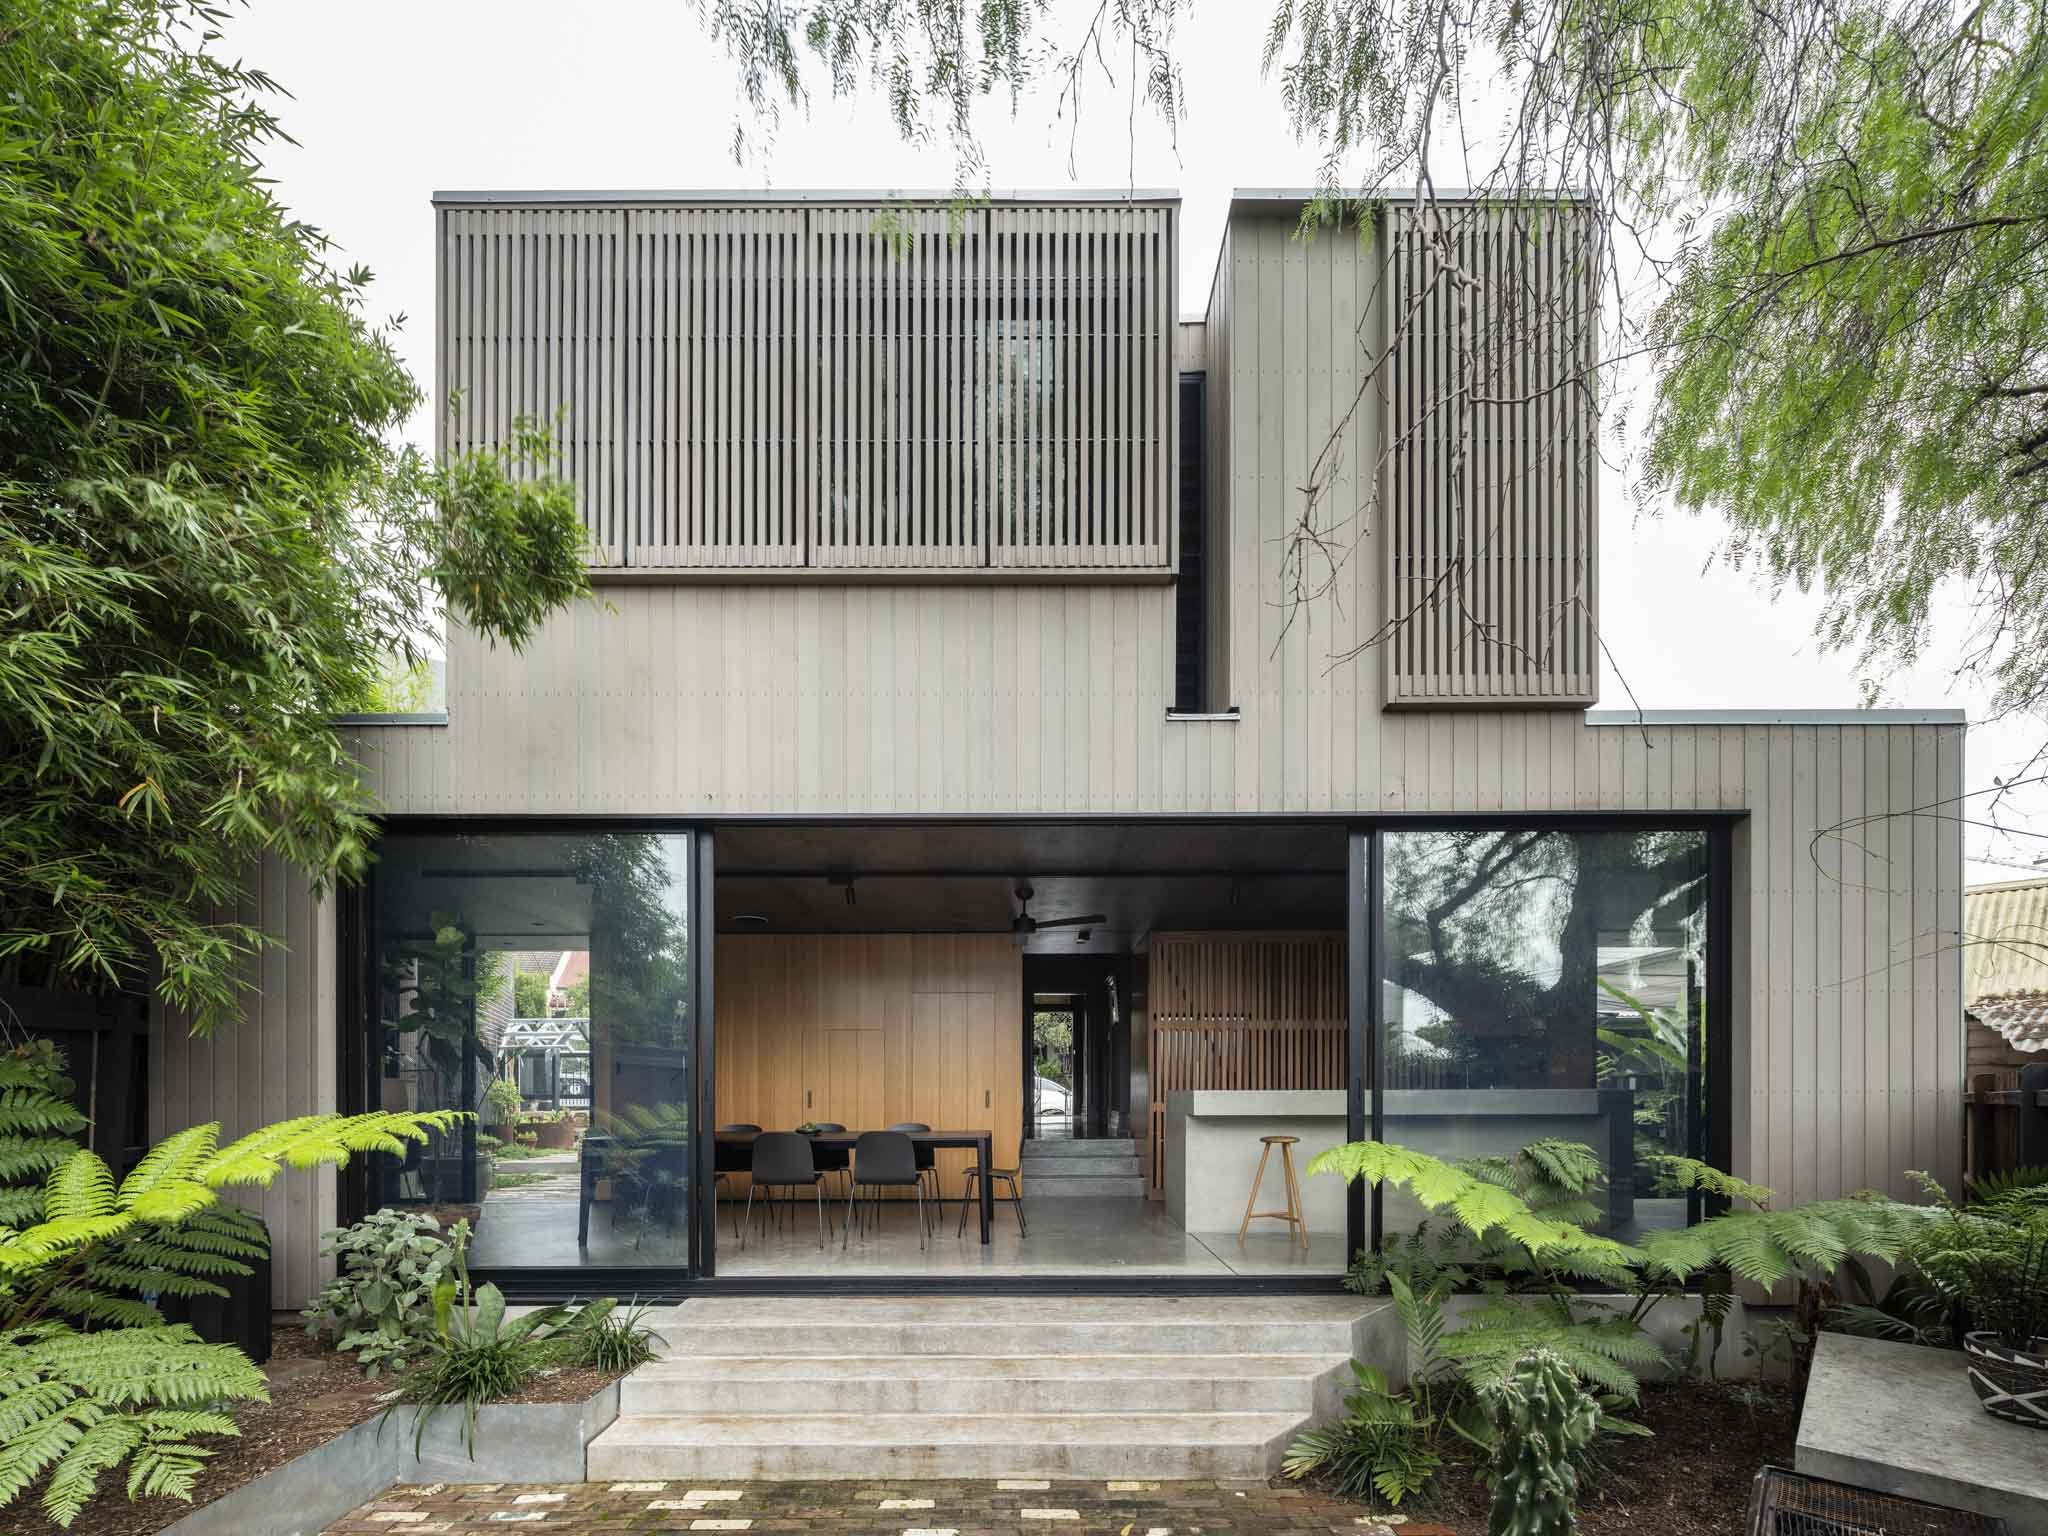 Rozelle Softwood by Benn & Penna Architects